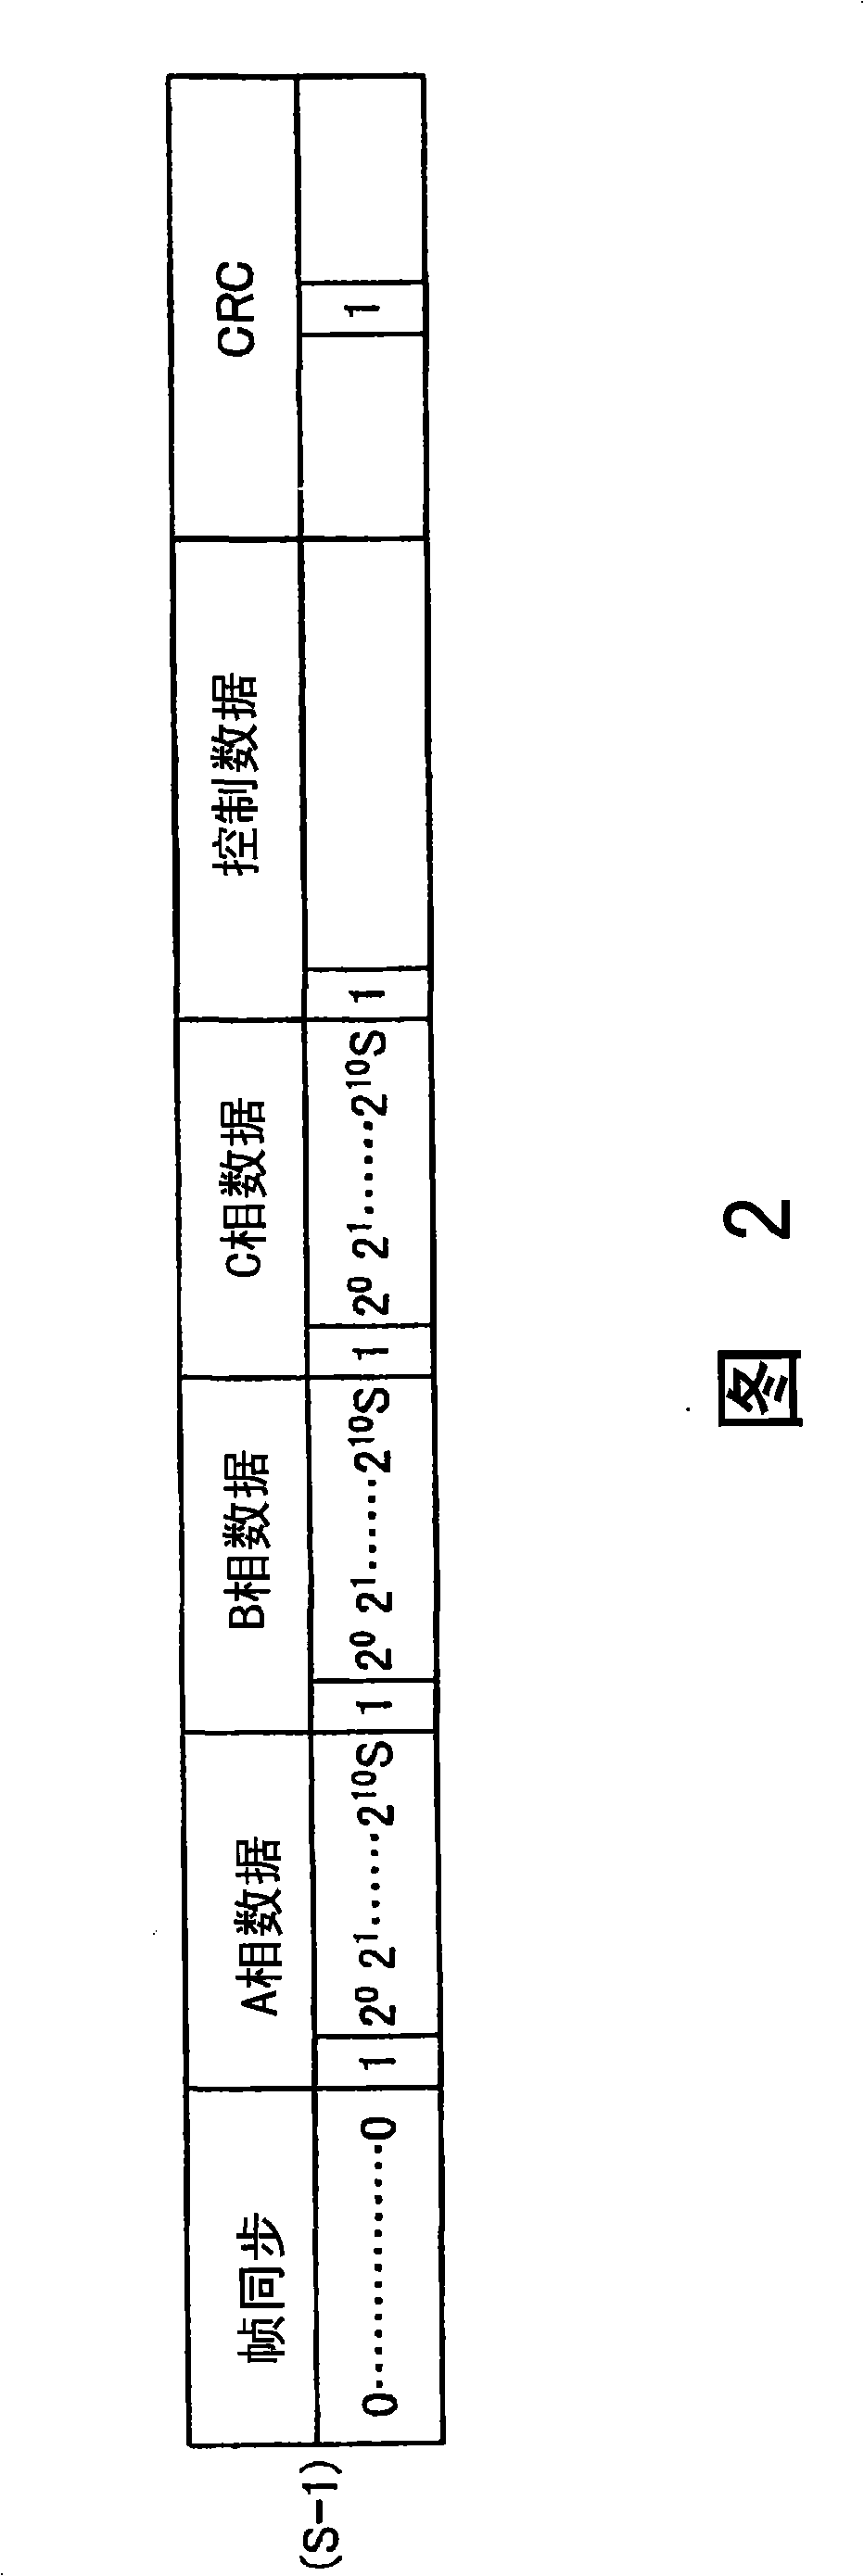 Current-differential relay device